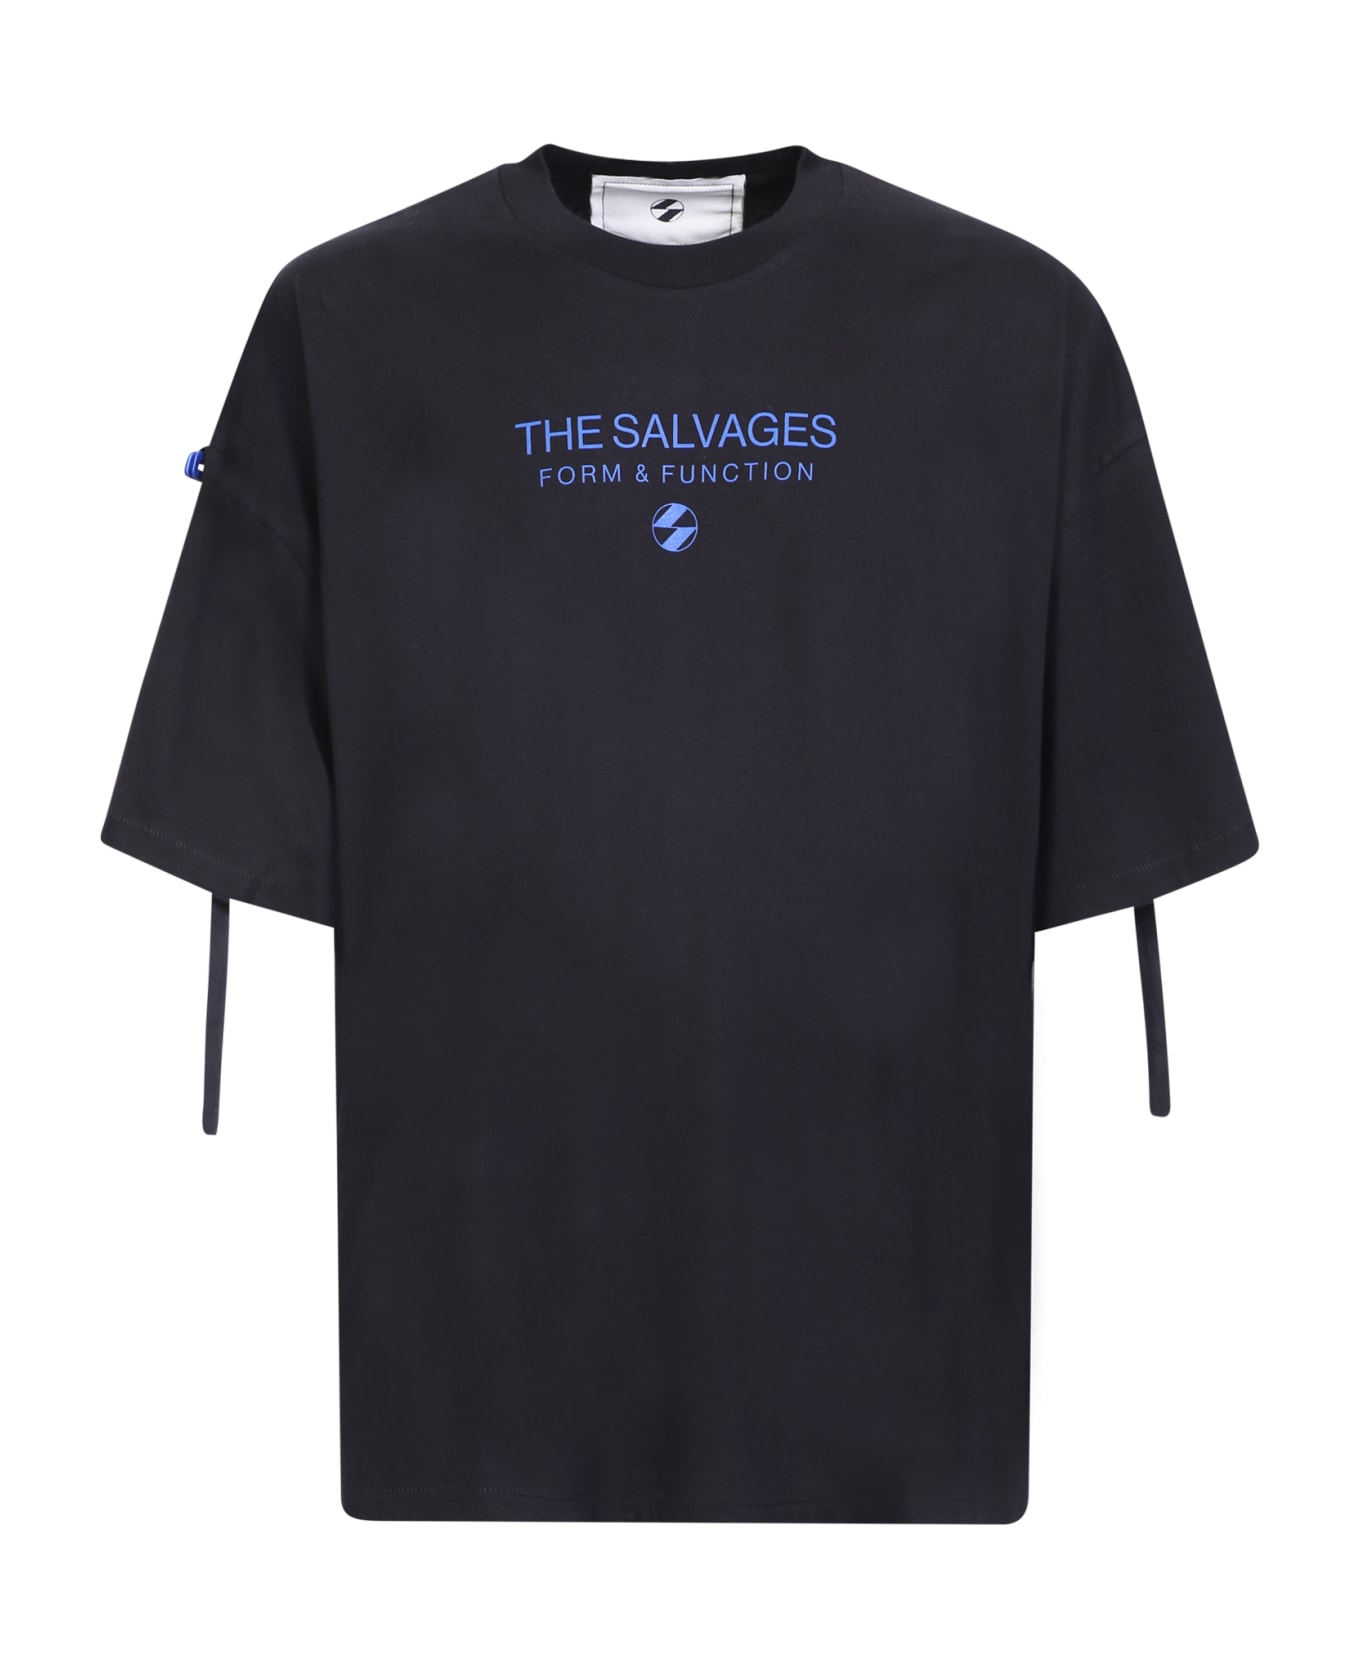 The Salvages From & Function D-ring T-shirt - Black